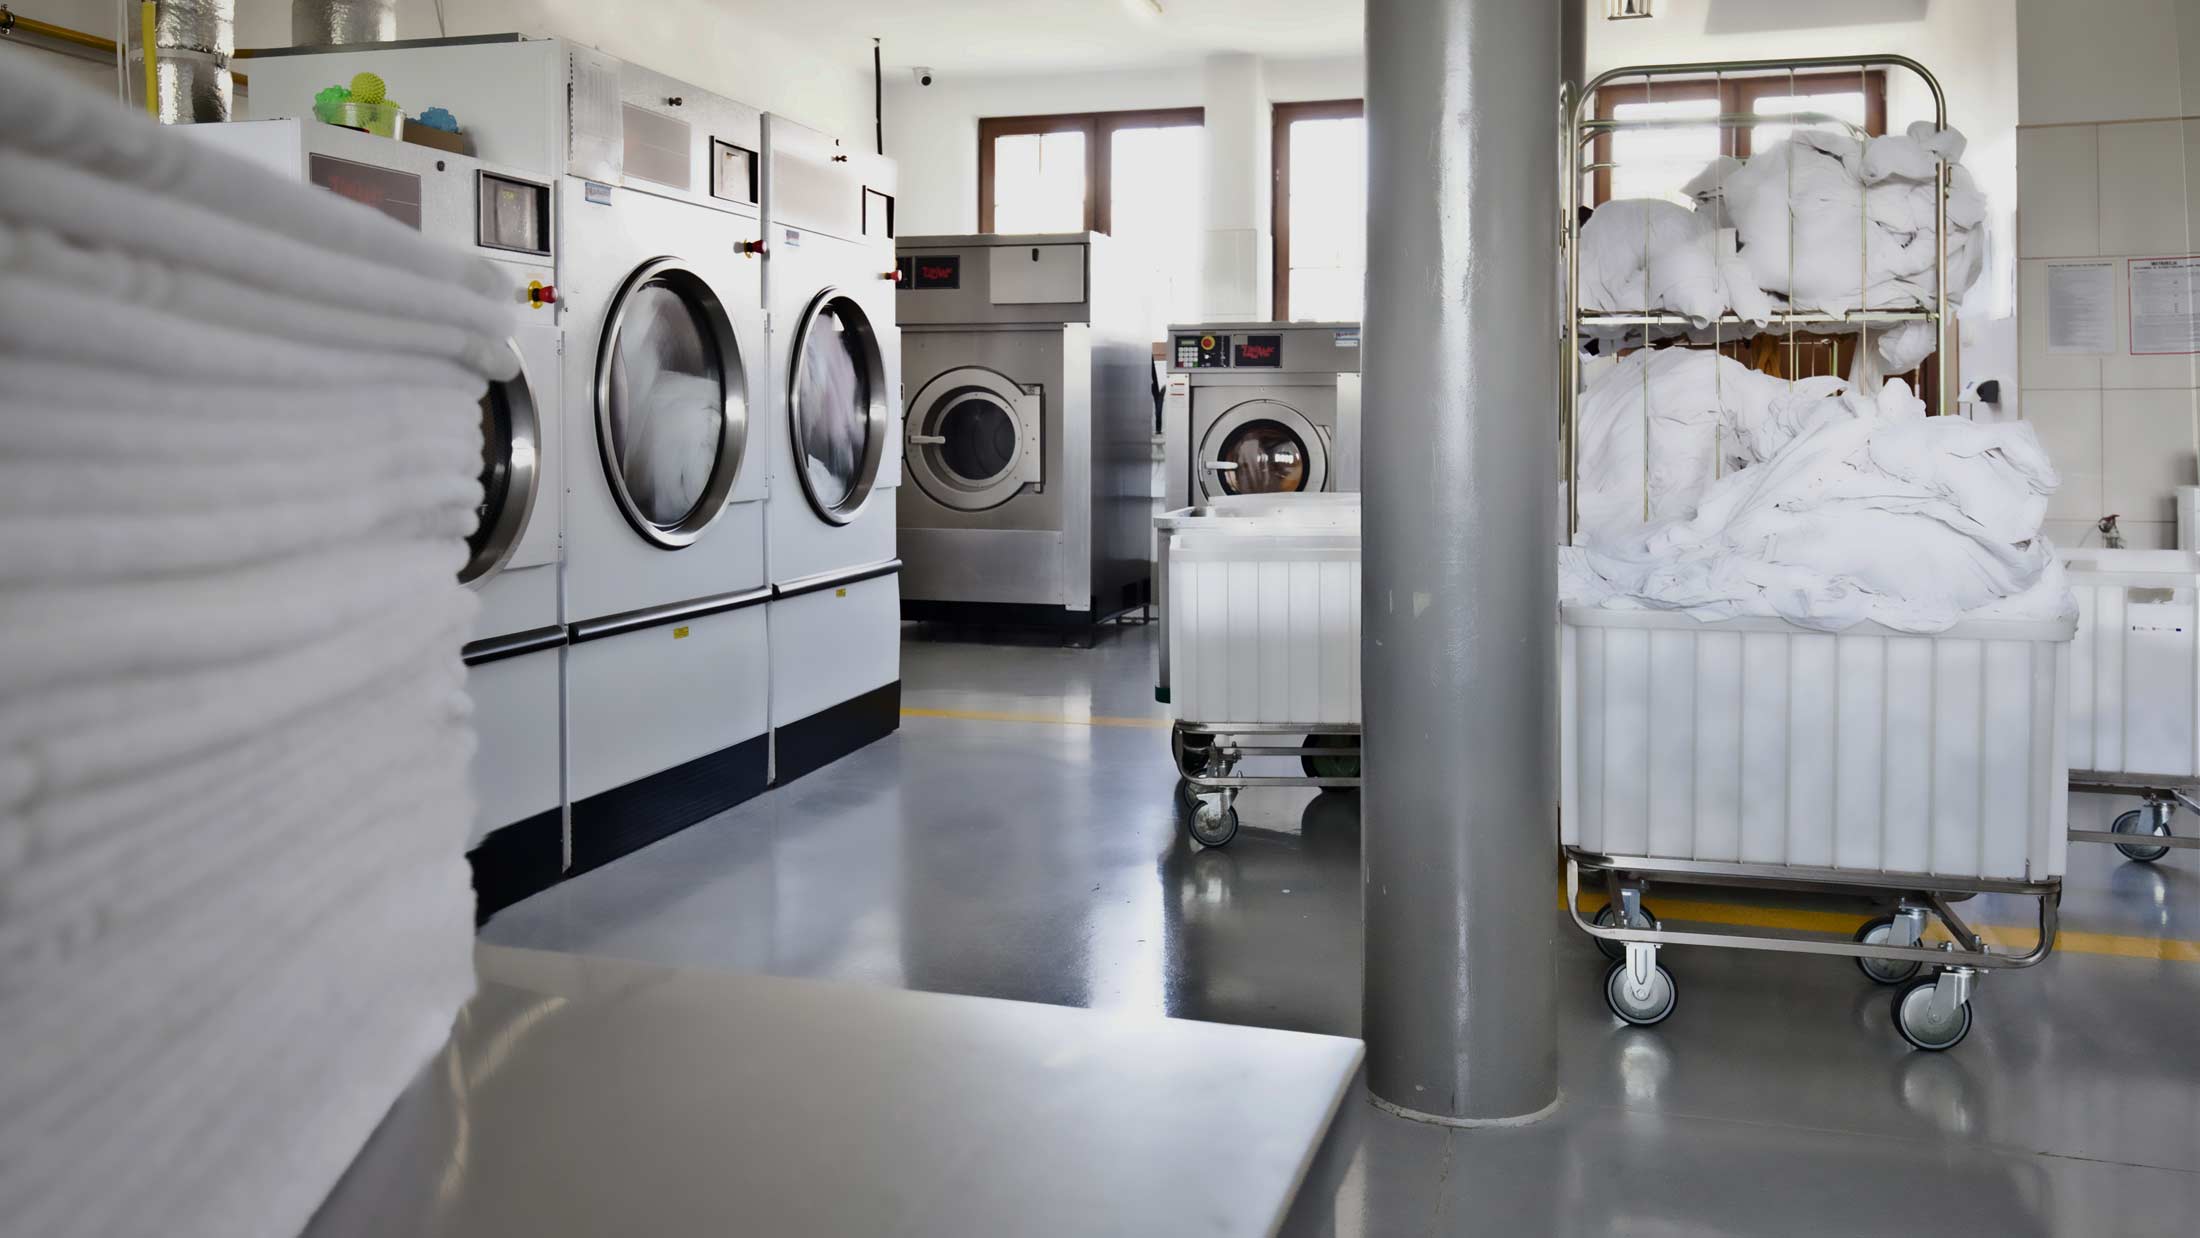 From Laundry Basket to Boardroom: Tips for Scaling Your Laundry Business